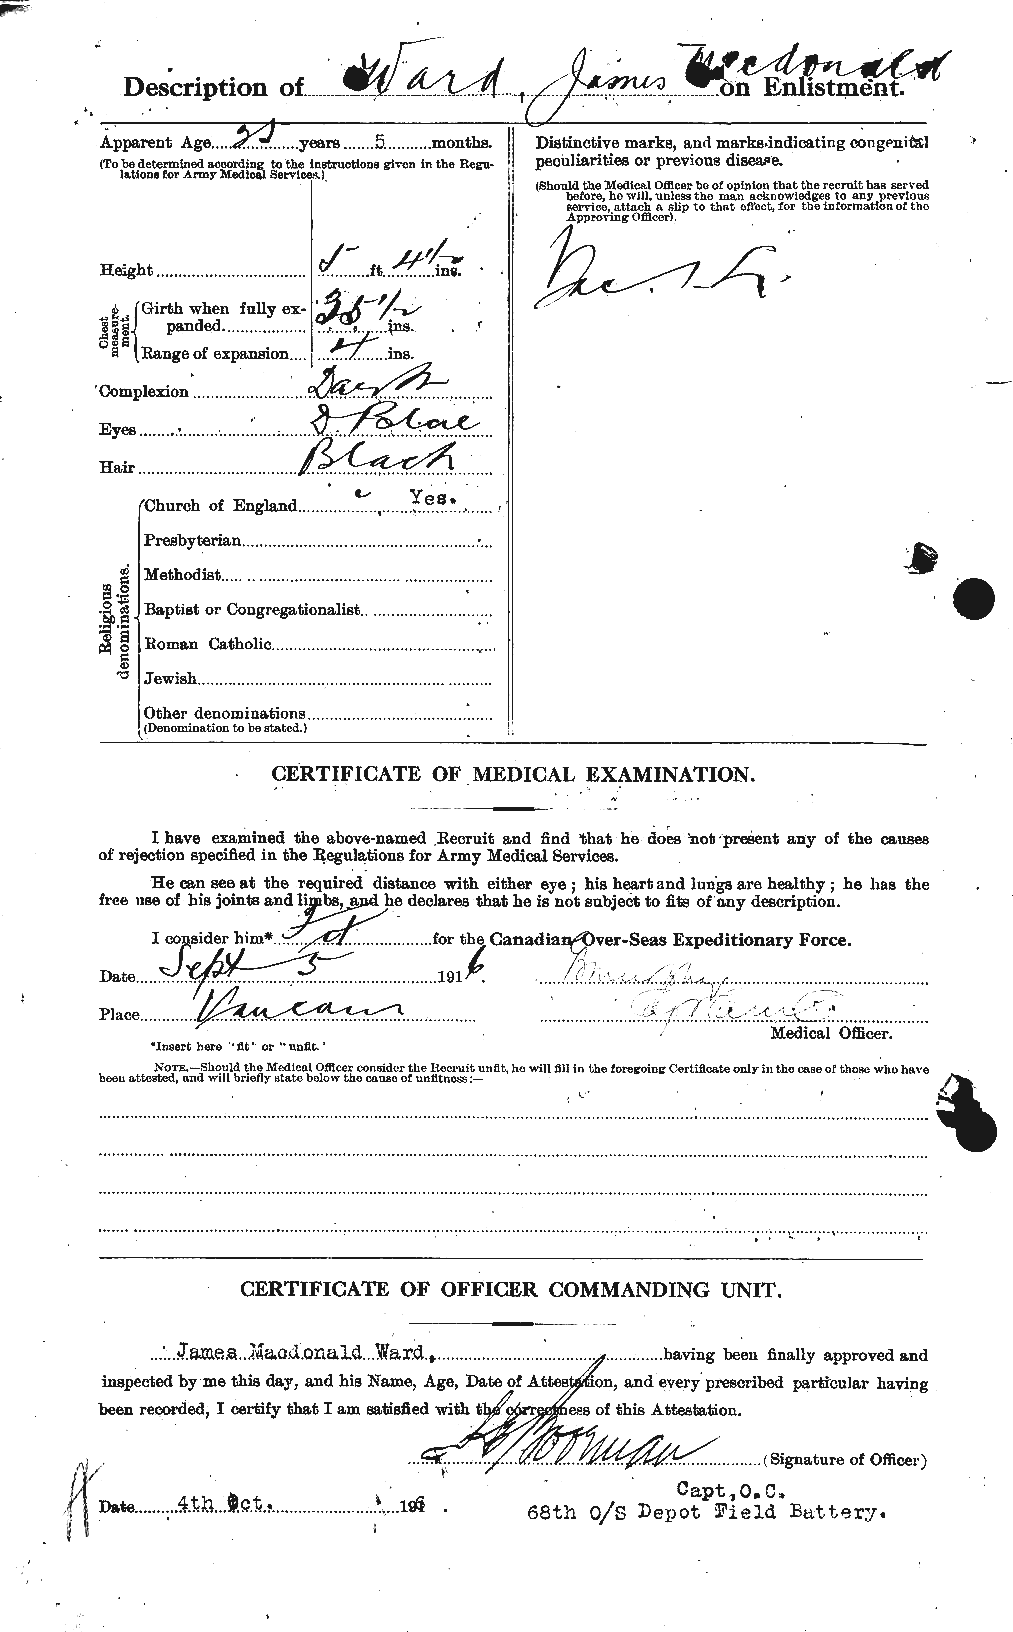 Personnel Records of the First World War - CEF 657914b